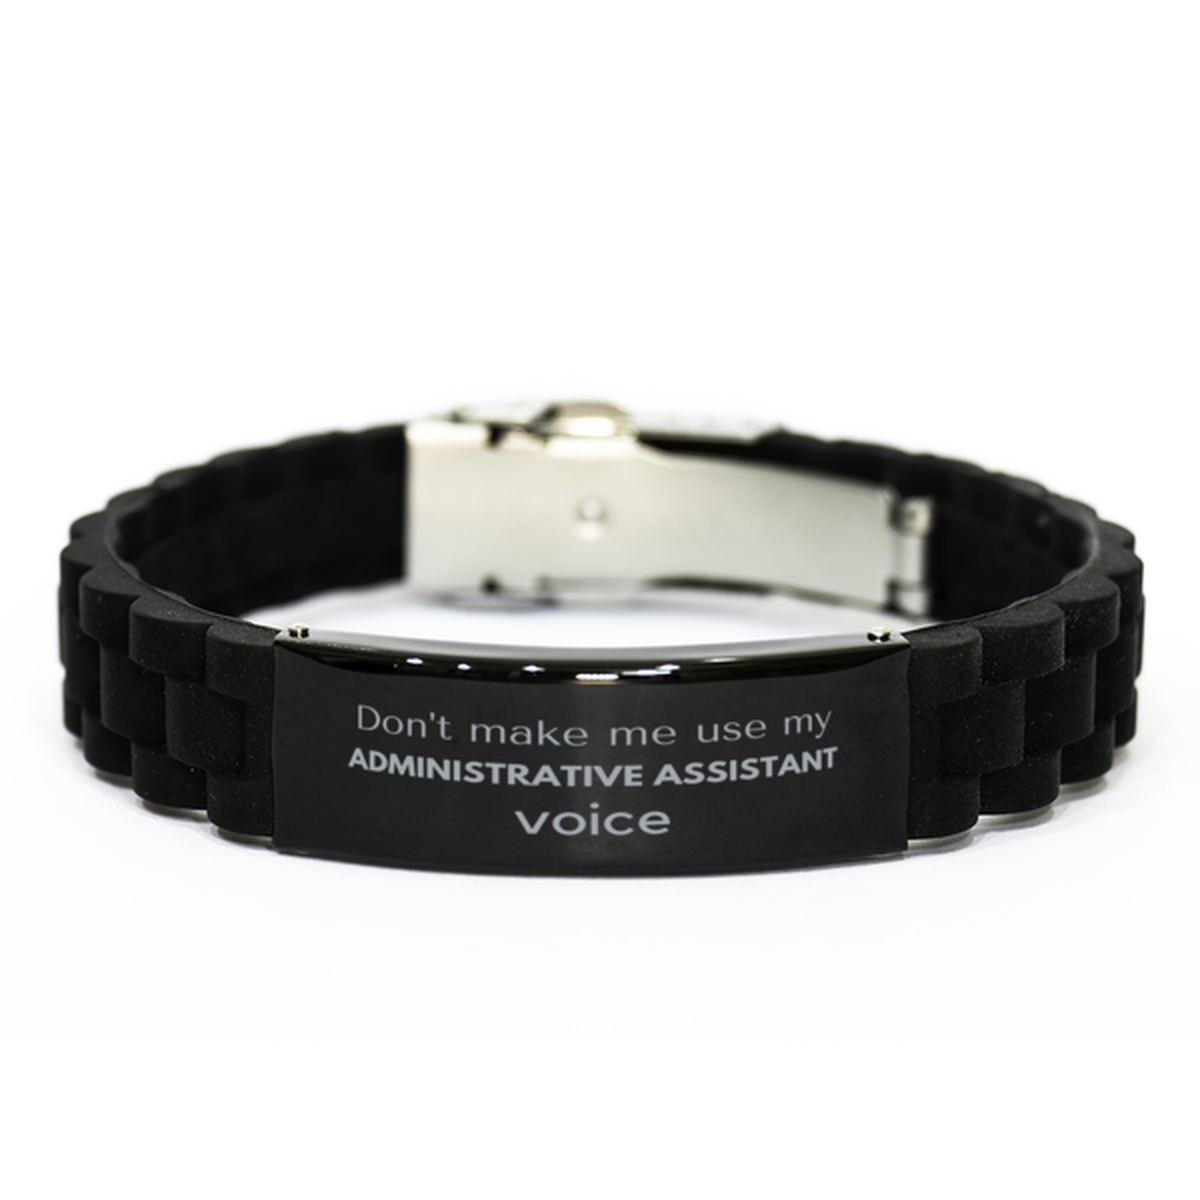 Don't make me use my Administrative Assistant voice, Sarcasm Administrative Assistant Gifts, Christmas Administrative Assistant Black Glidelock Clasp Bracelet Birthday Unique Gifts For Administrative Assistant Coworkers, Men, Women, Colleague, Friends